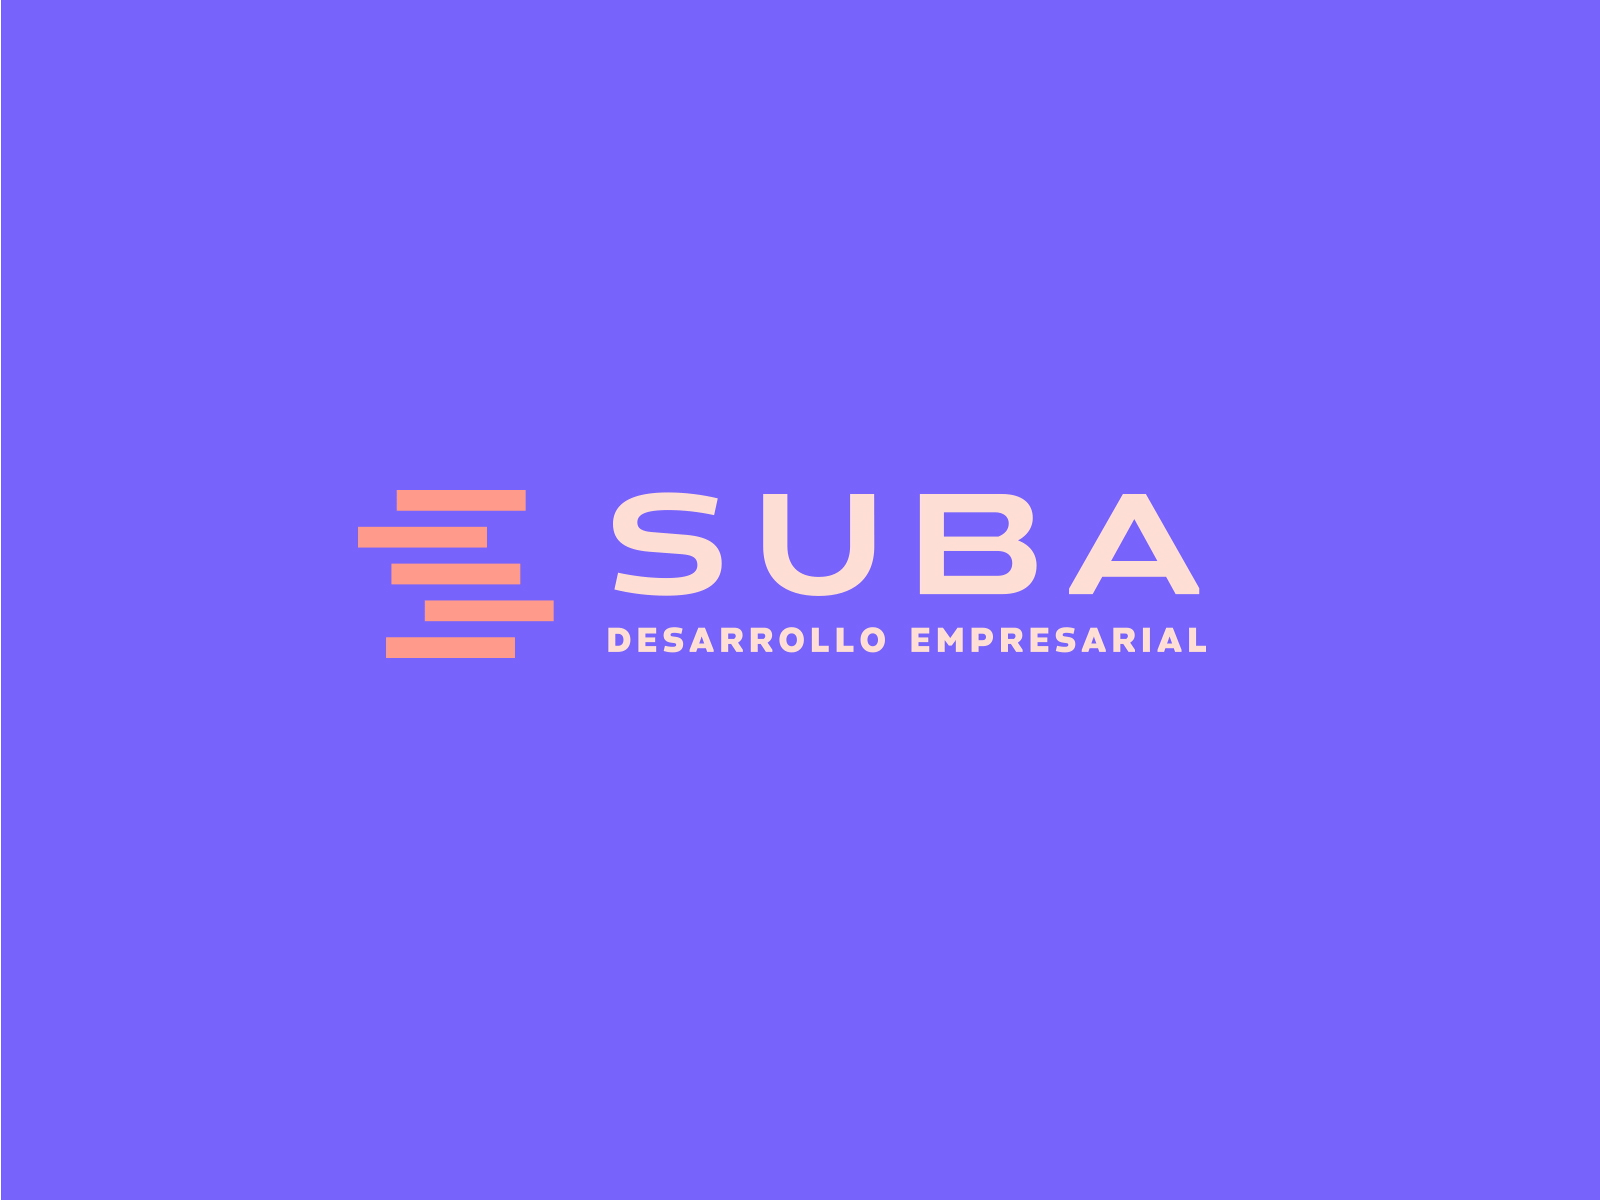 suba-financial-services-by-agustin-r-michel-on-dribbble